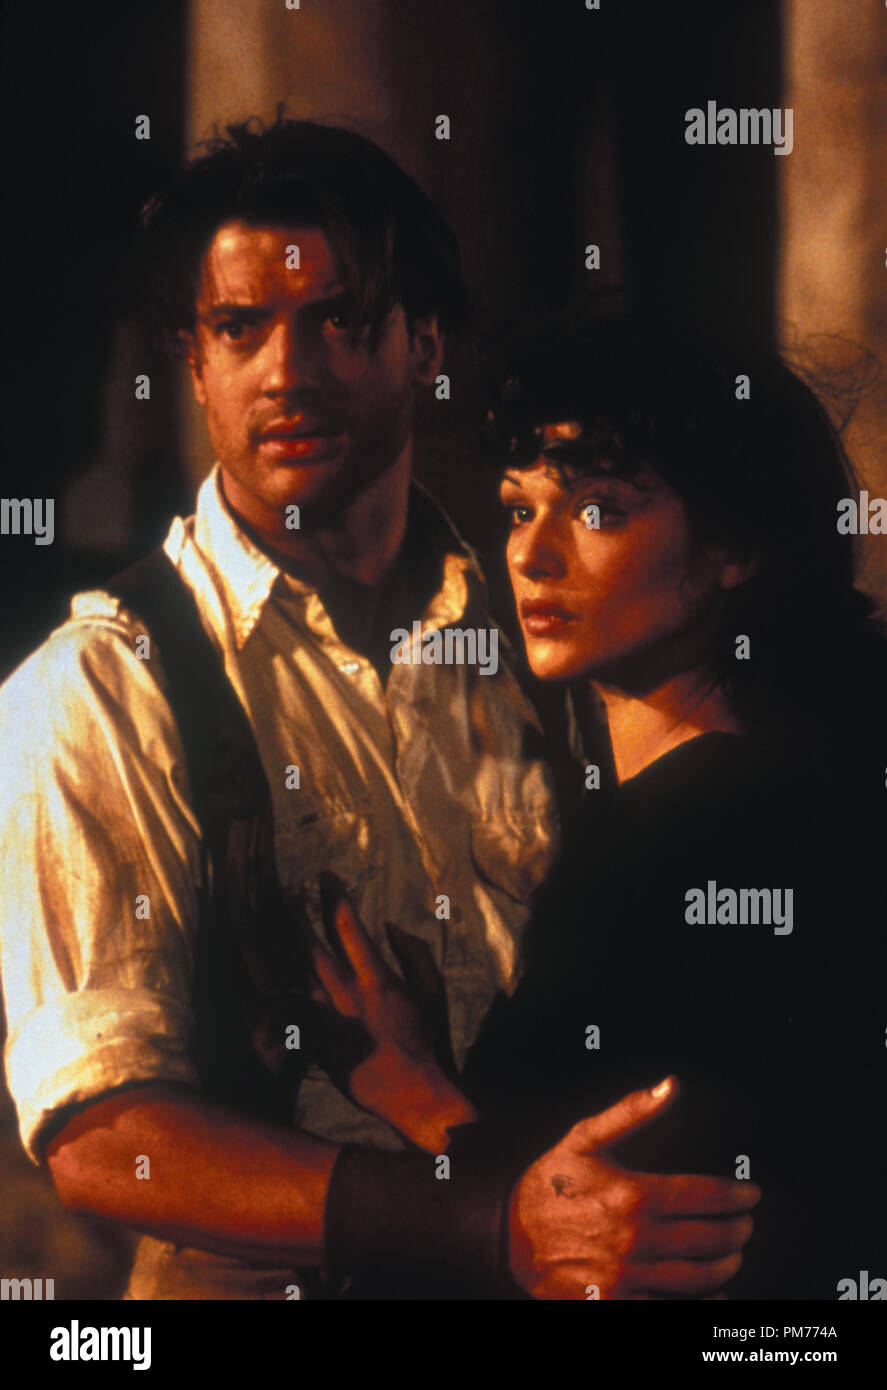 Film Still / Publicity Still from 'The Mummy' Brendon Fraser, Rachel Weisz © 1999 Universal    File Reference # 30973739THA  For Editorial Use Only -  All Rights Reserved Stock Photo